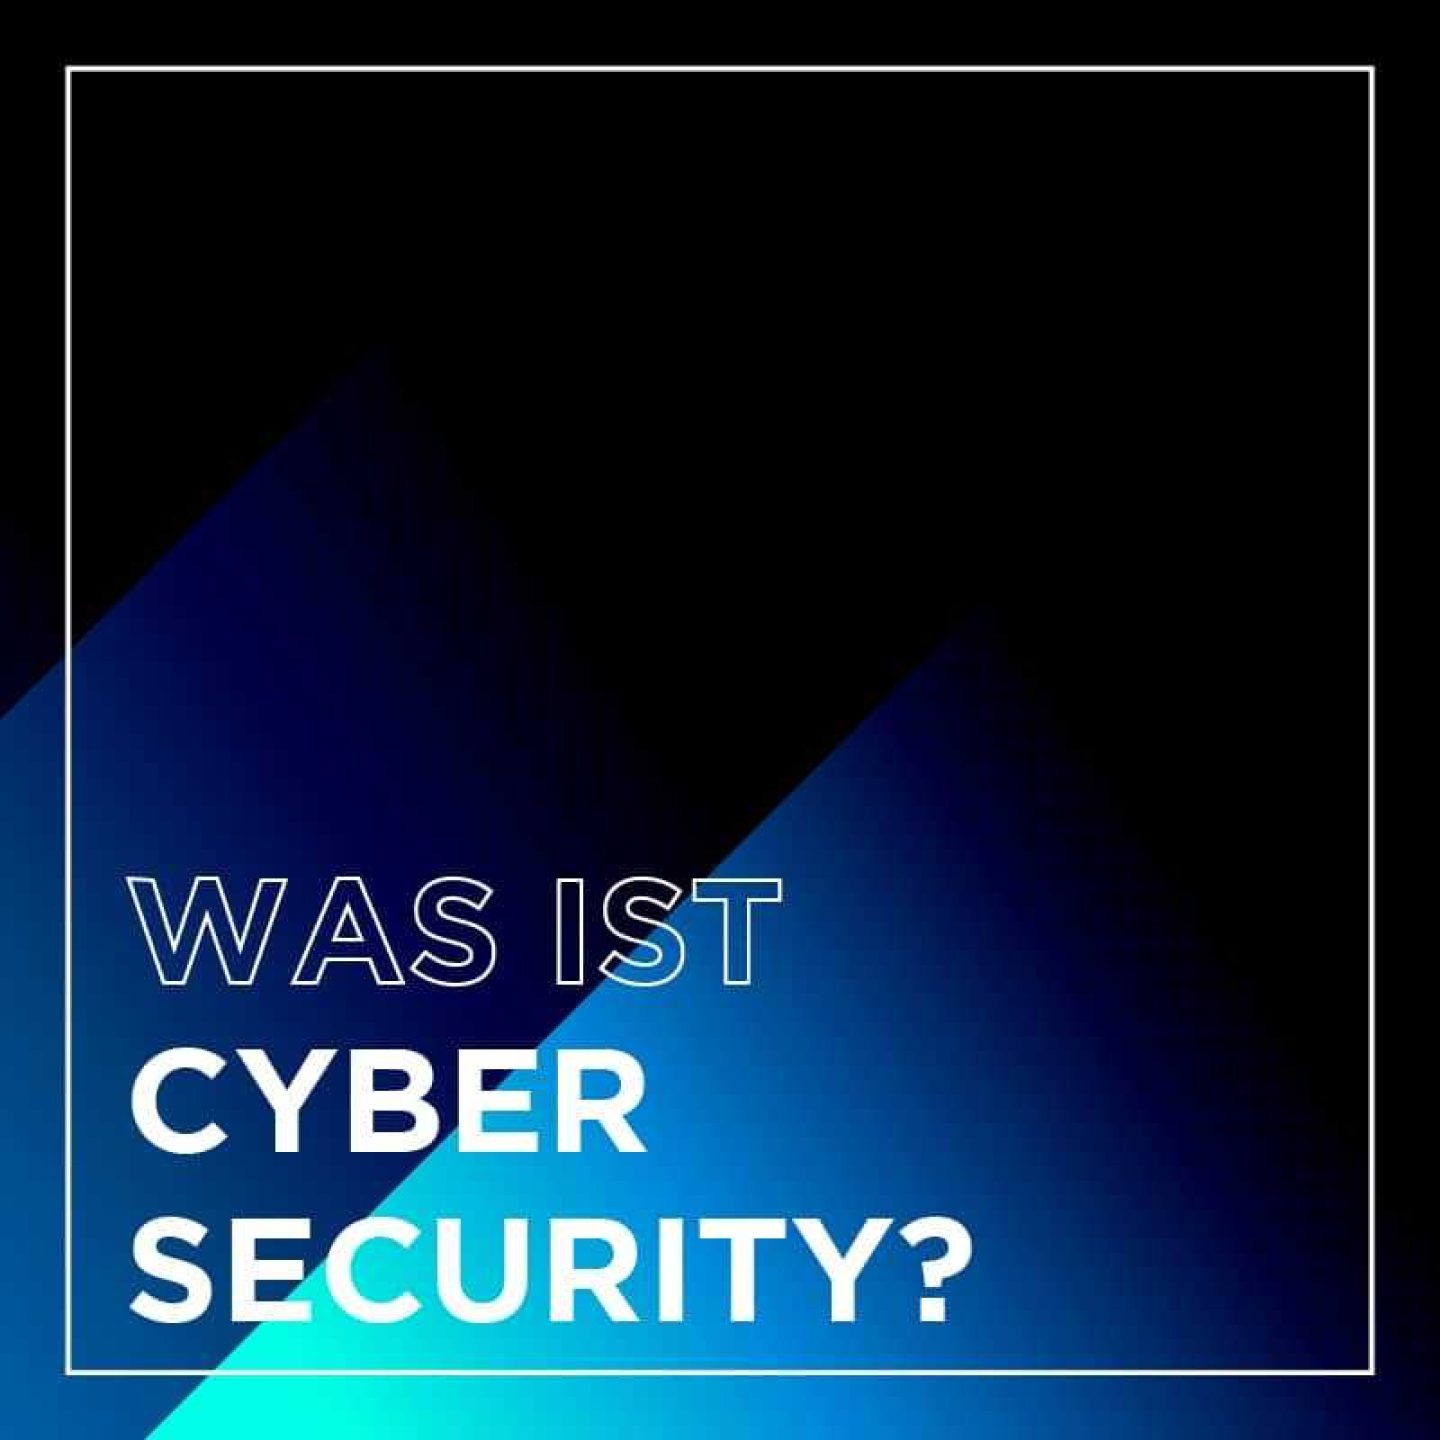 Kachel insight cyber security was ist cyber security